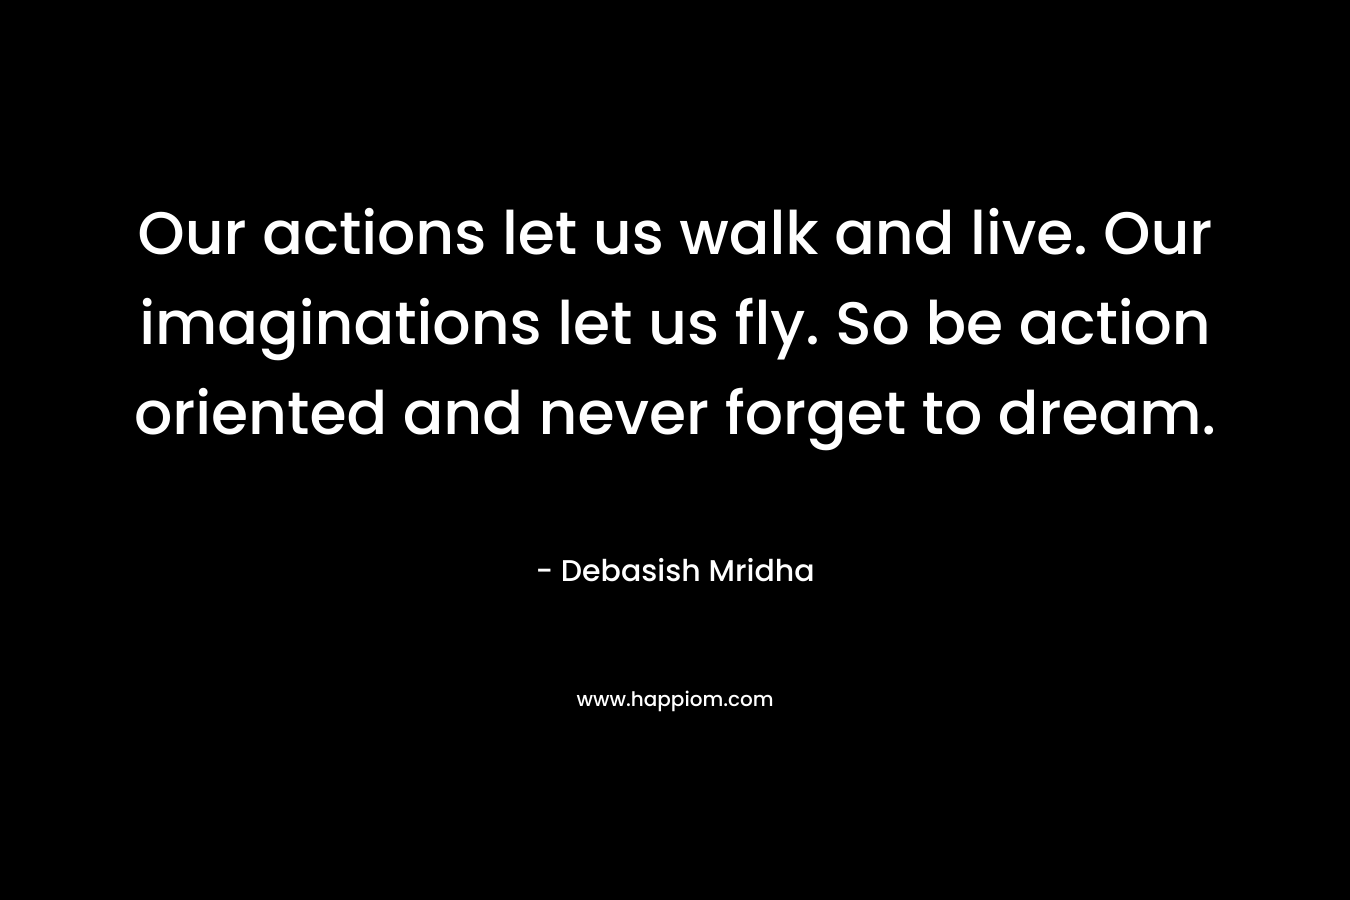 Our actions let us walk and live. Our imaginations let us fly. So be action oriented and never forget to dream.